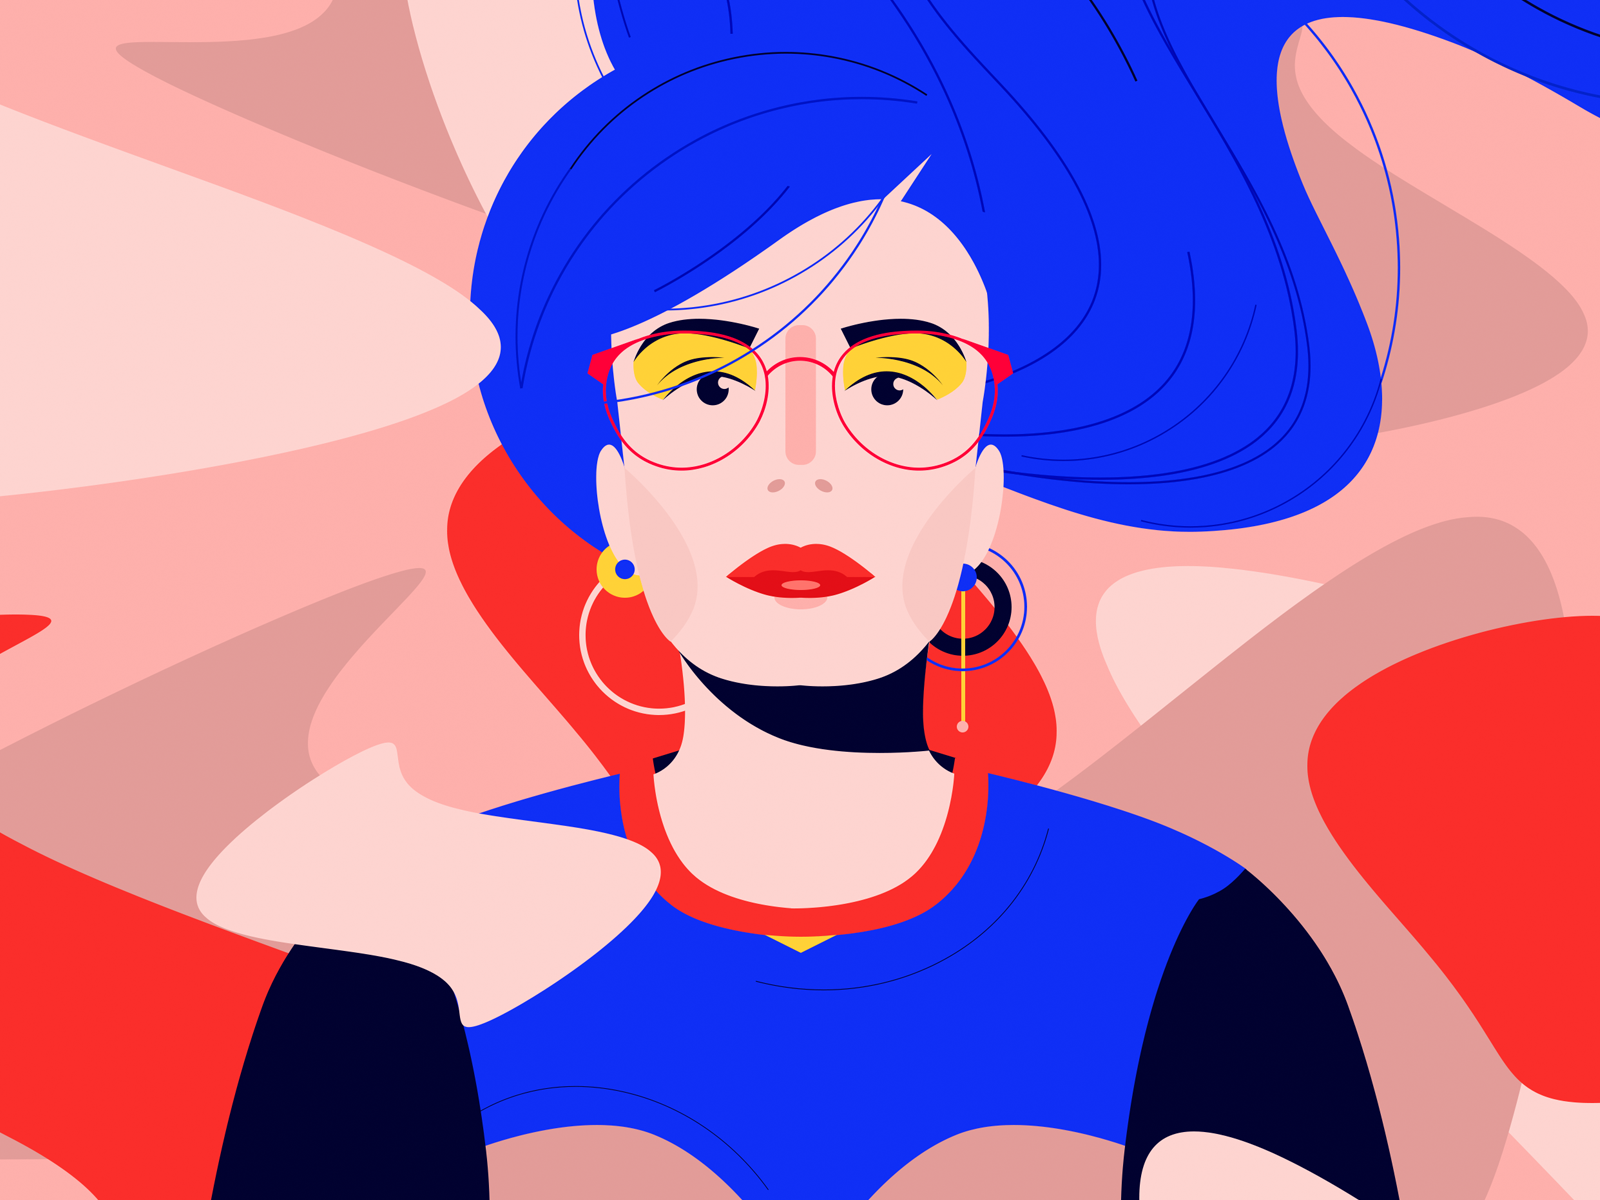 face by Lena Nor on Dribbble